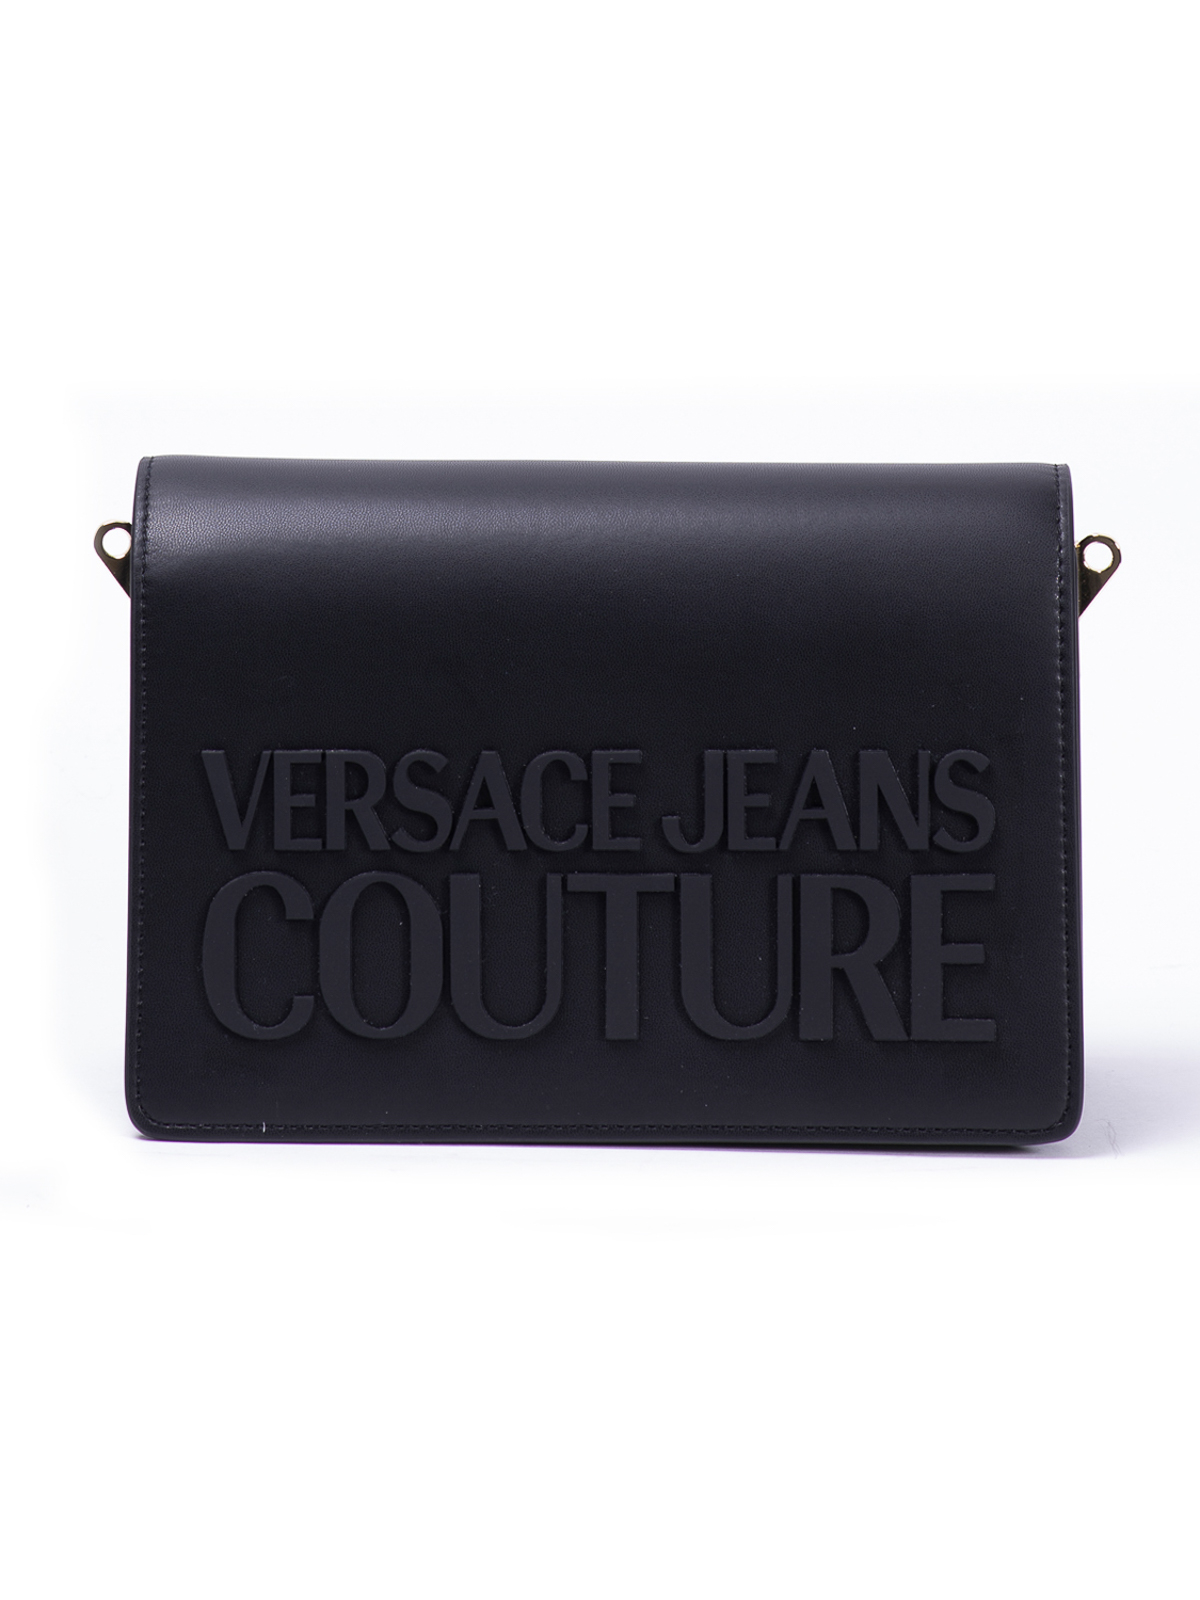 Cross body bags Versace Jeans Couture - Institutional logo sketch -